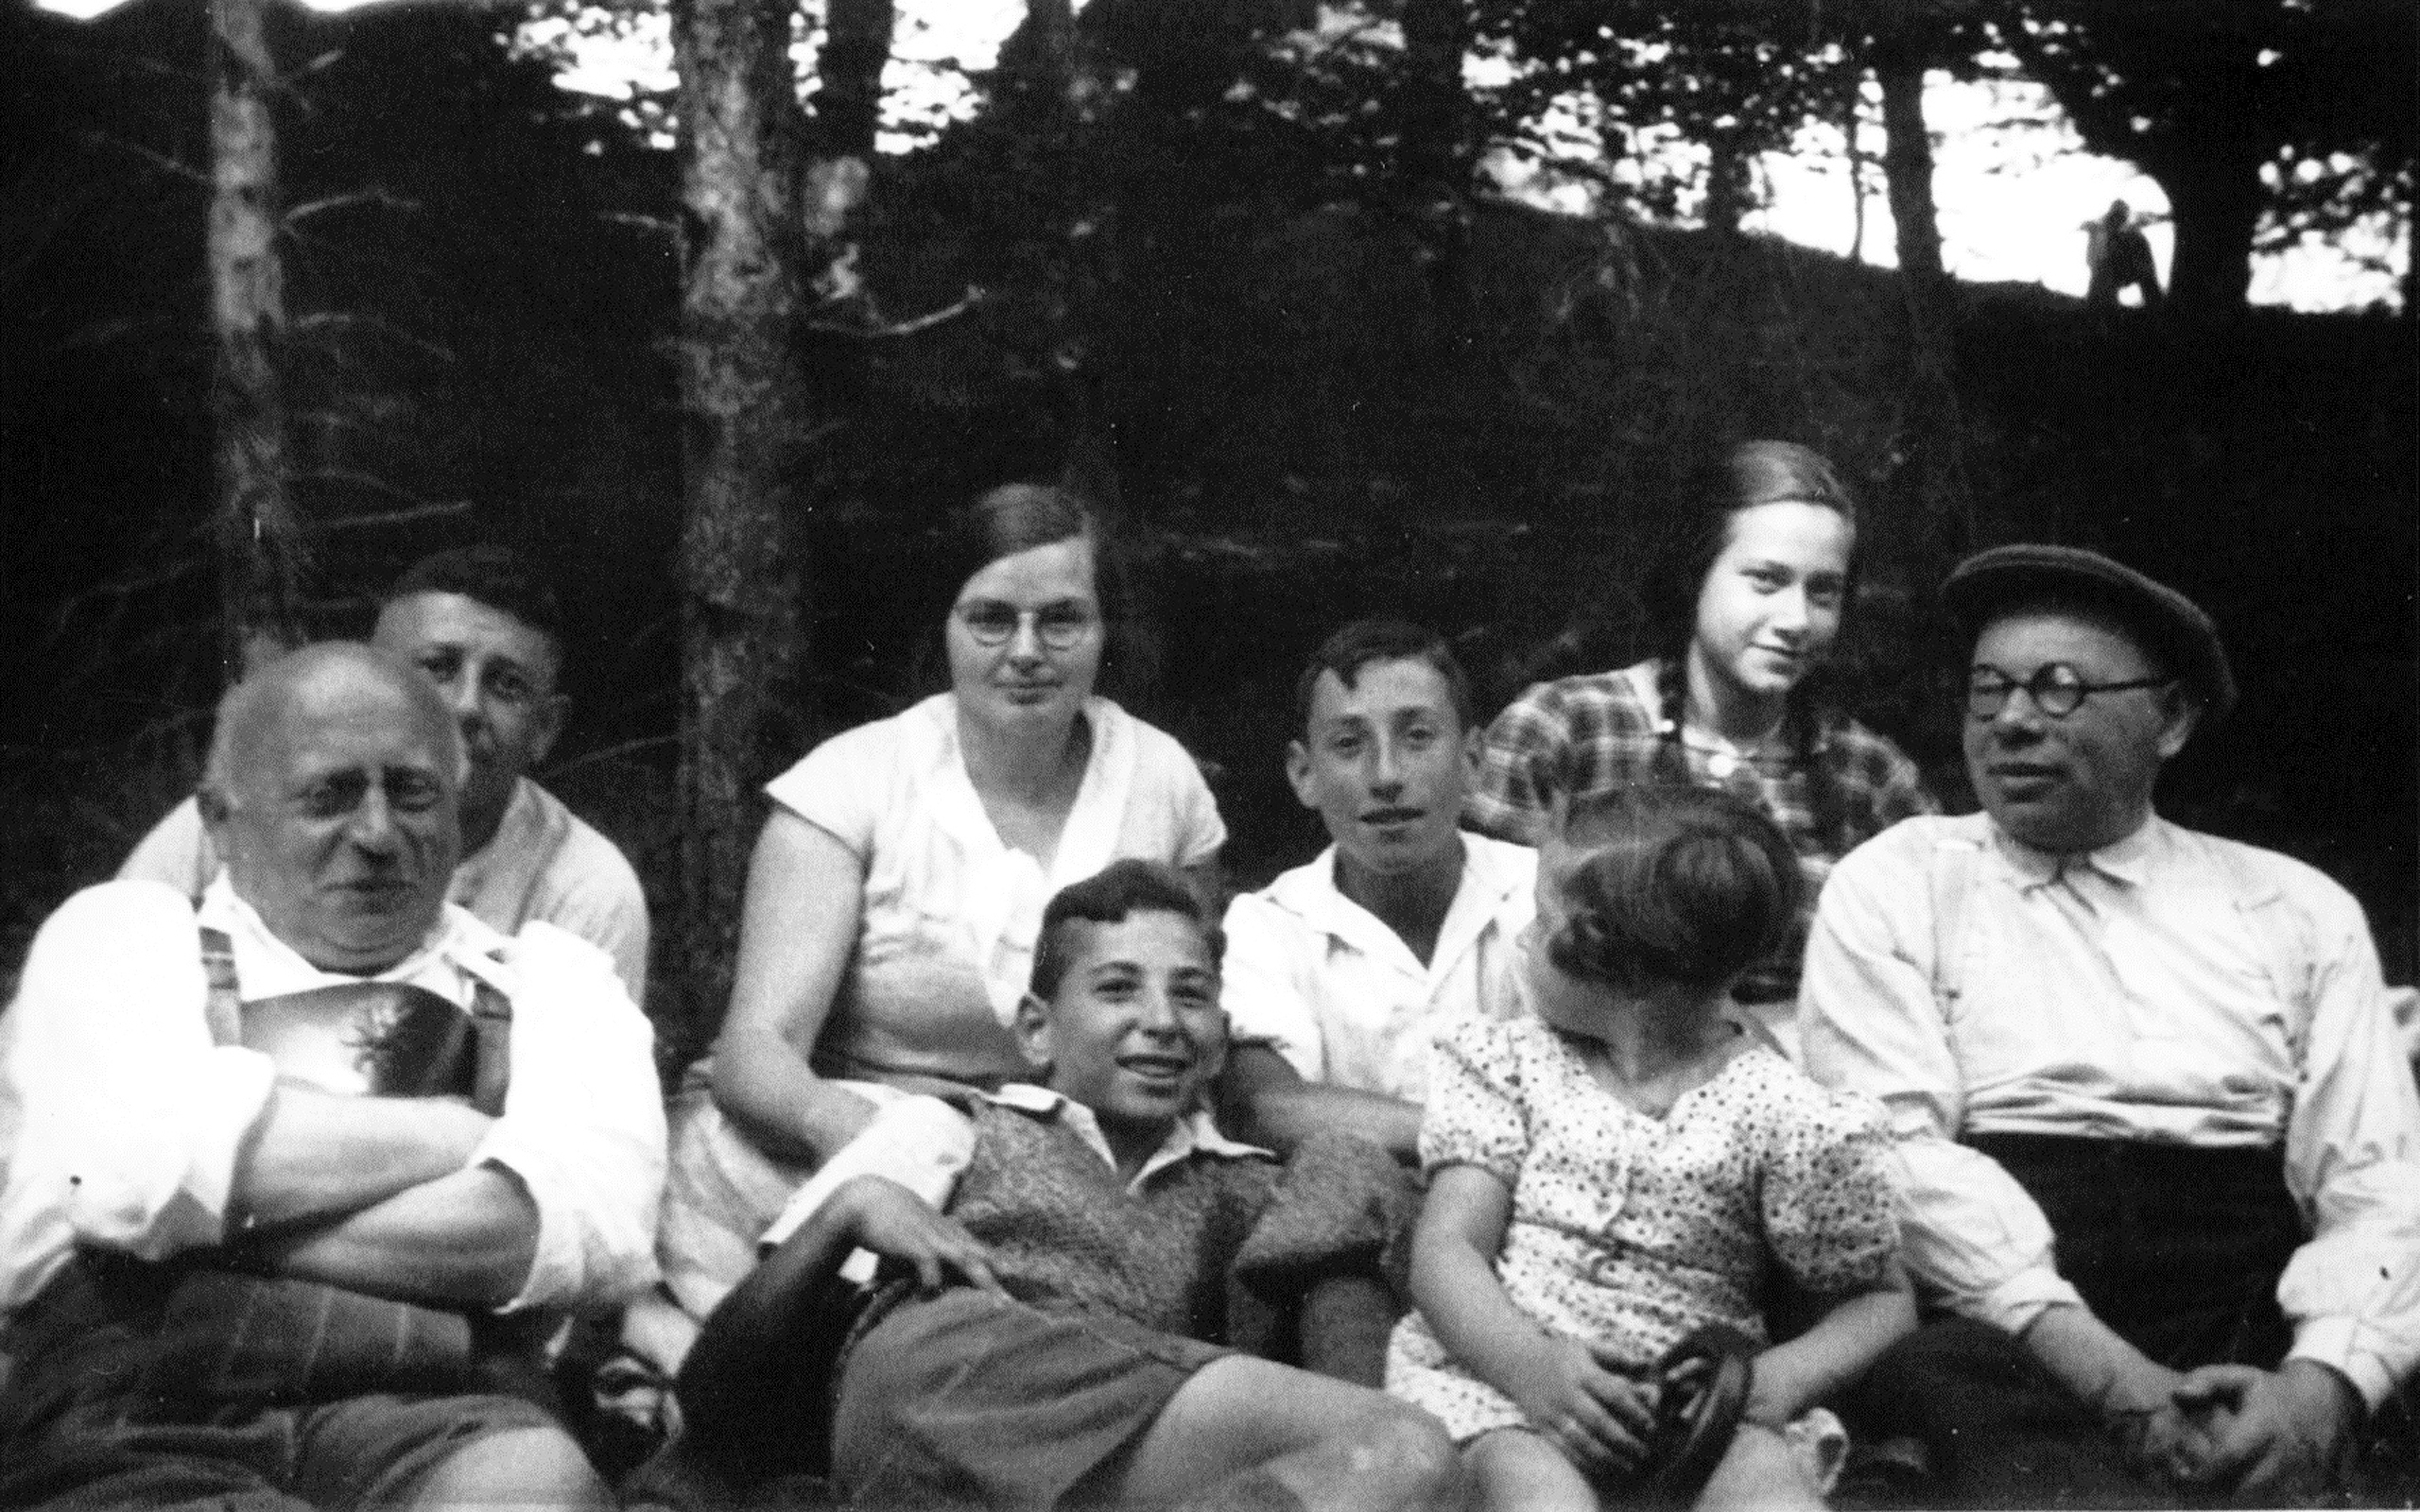 The photograph shows Manfred with adults and children on a trip in the Swabian Alb.